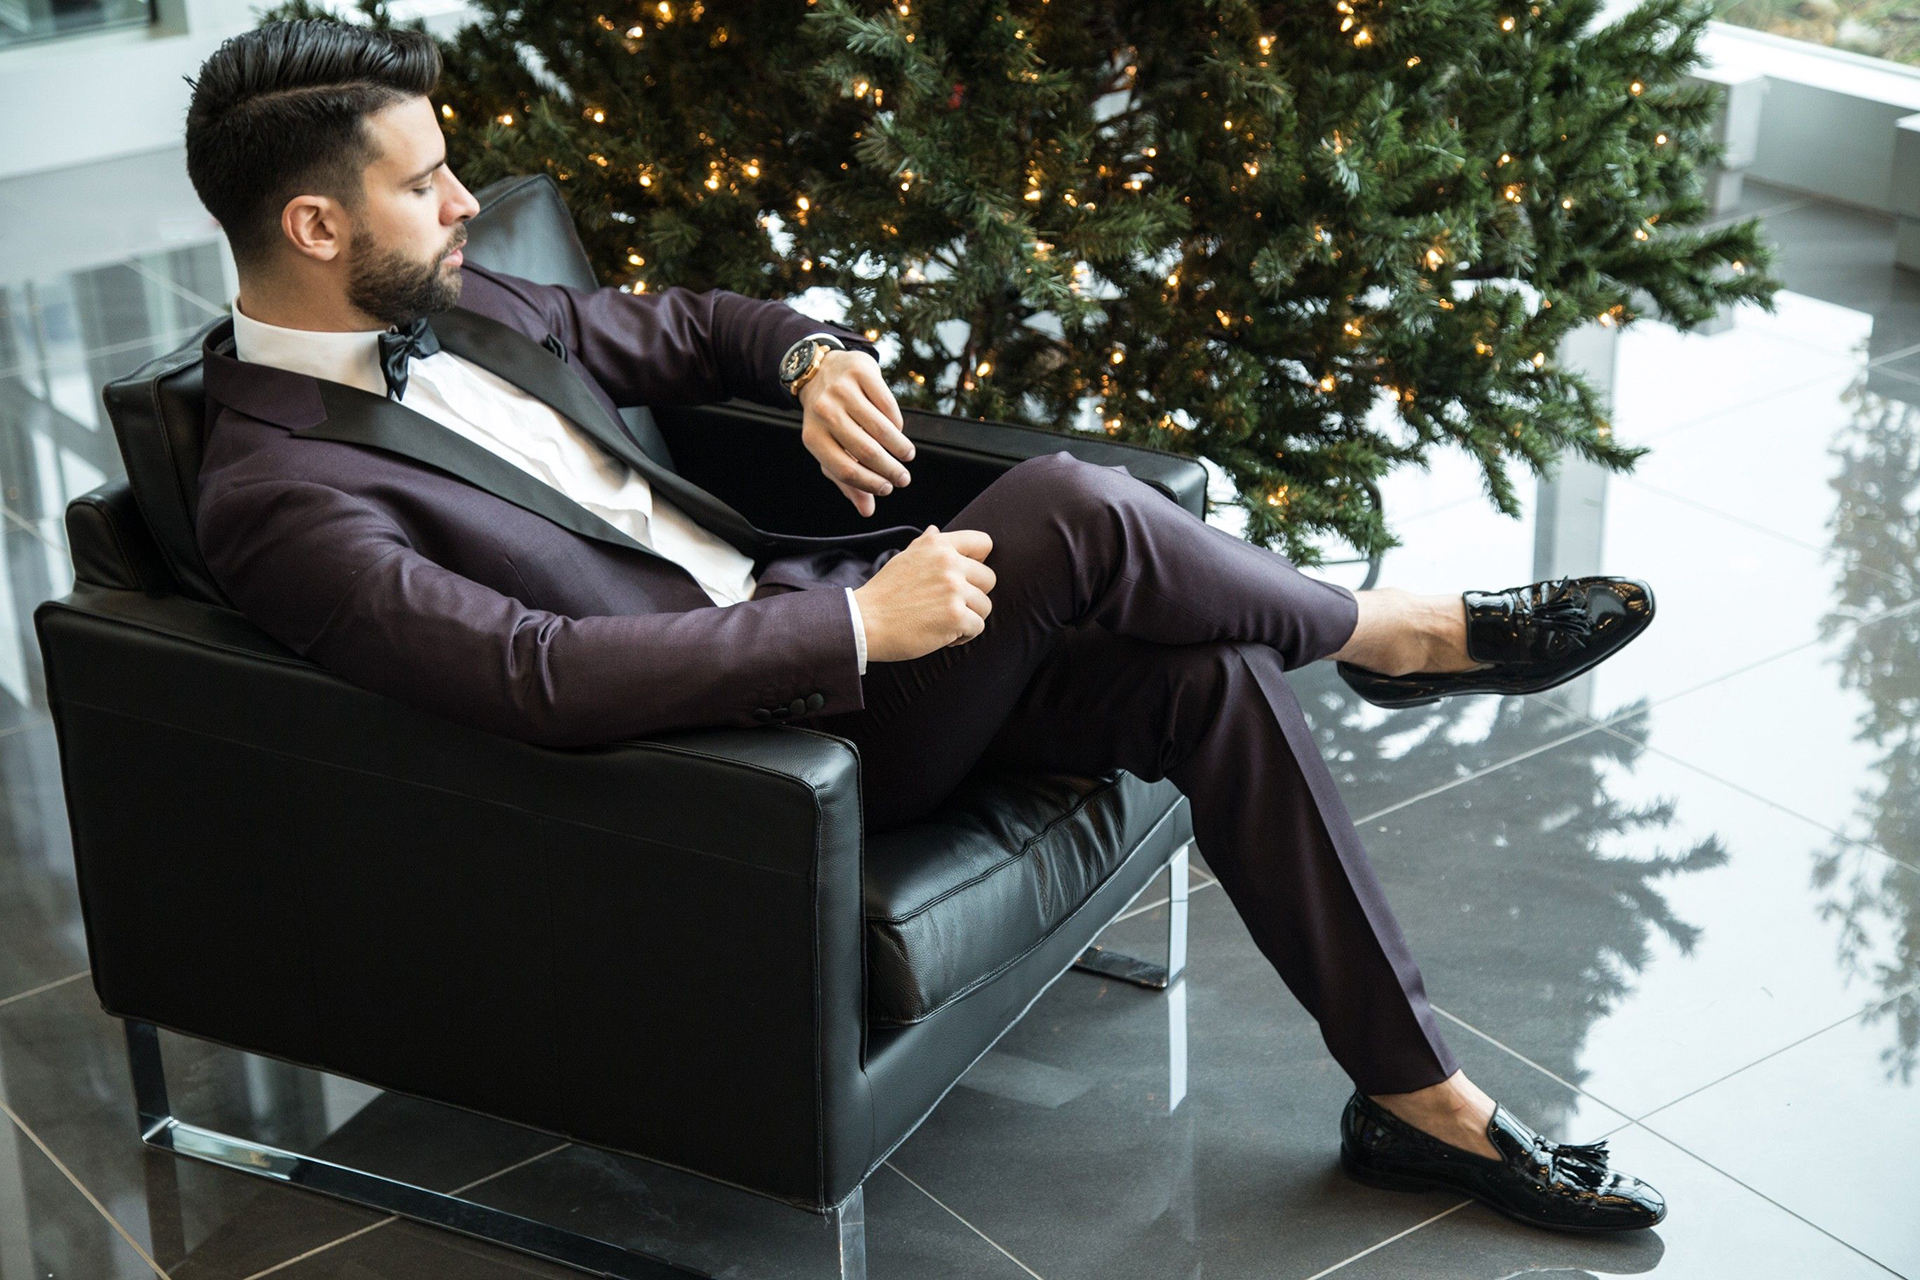 Wearing black patent leather loafers with a burgundy tuxedo